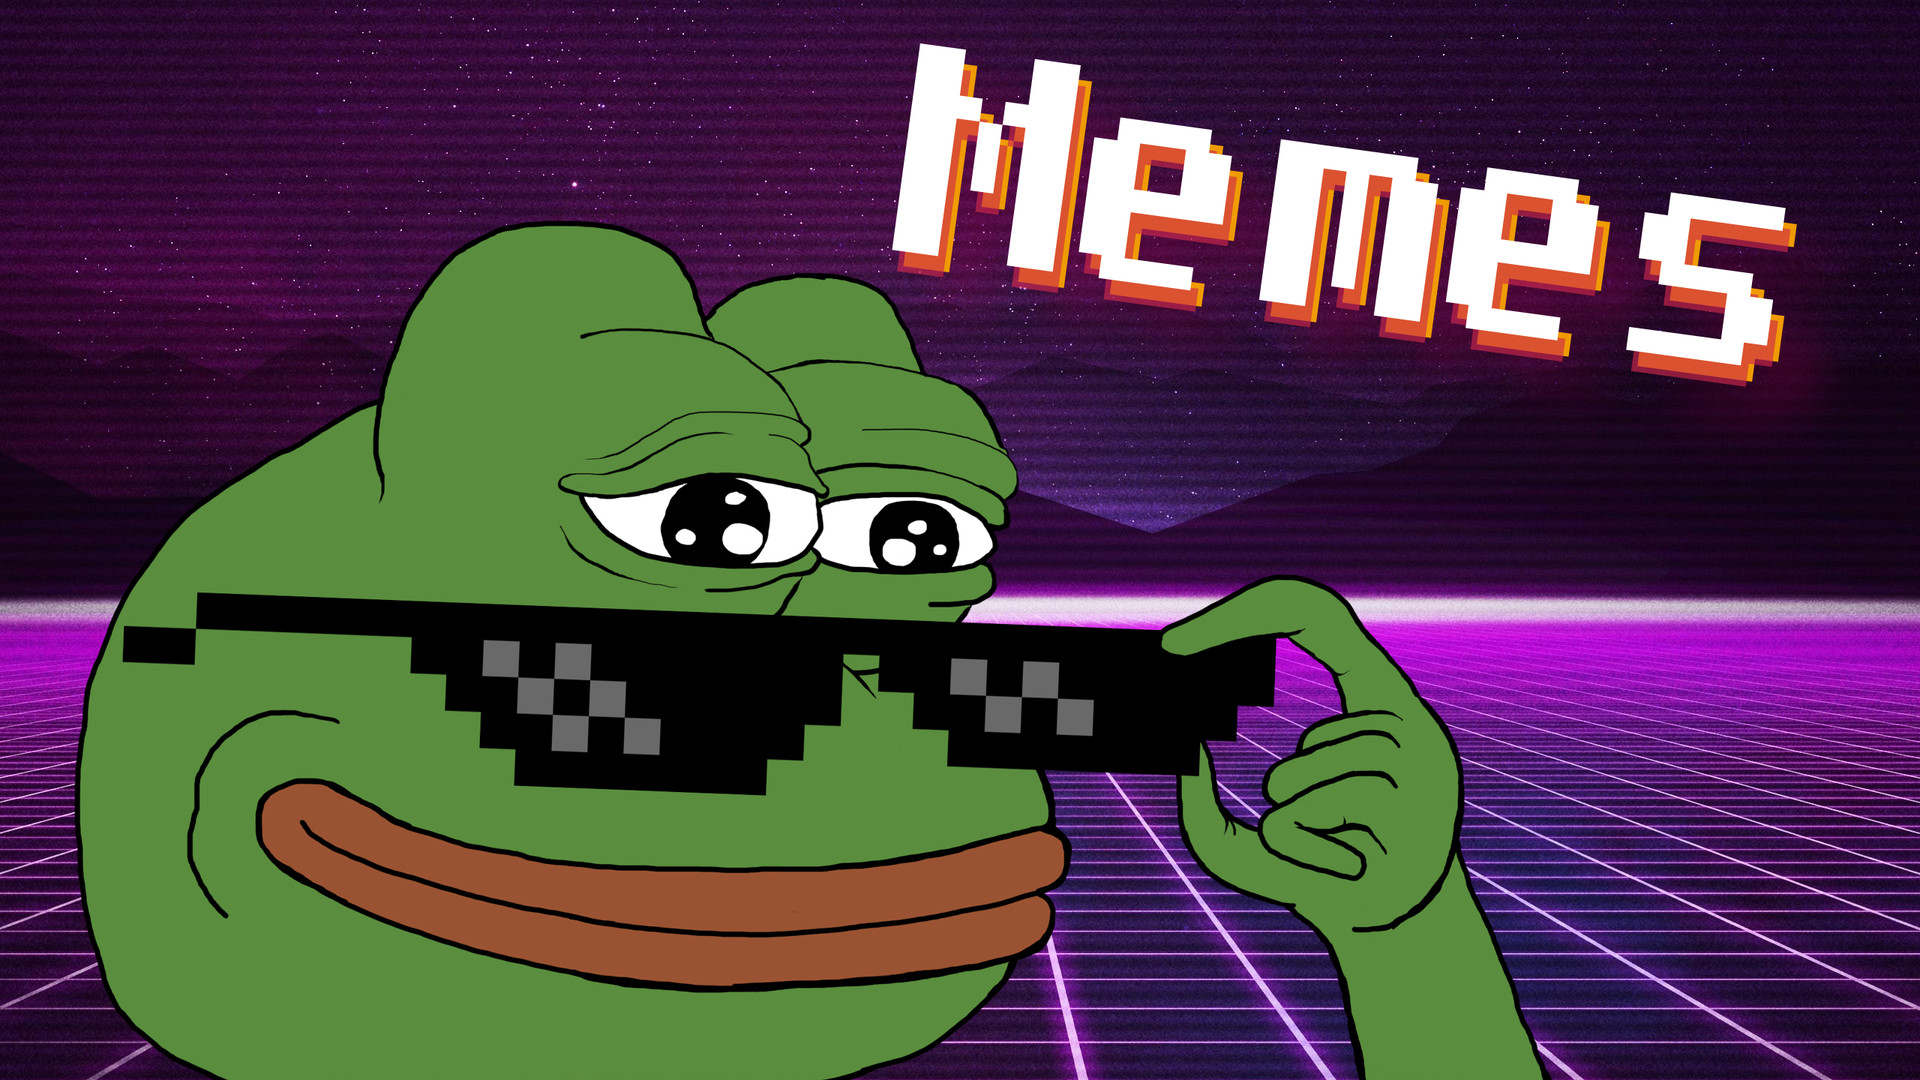 Pepe the Frog Soviet Blyat Version Wallpaper by Dthlives - Image Abyss